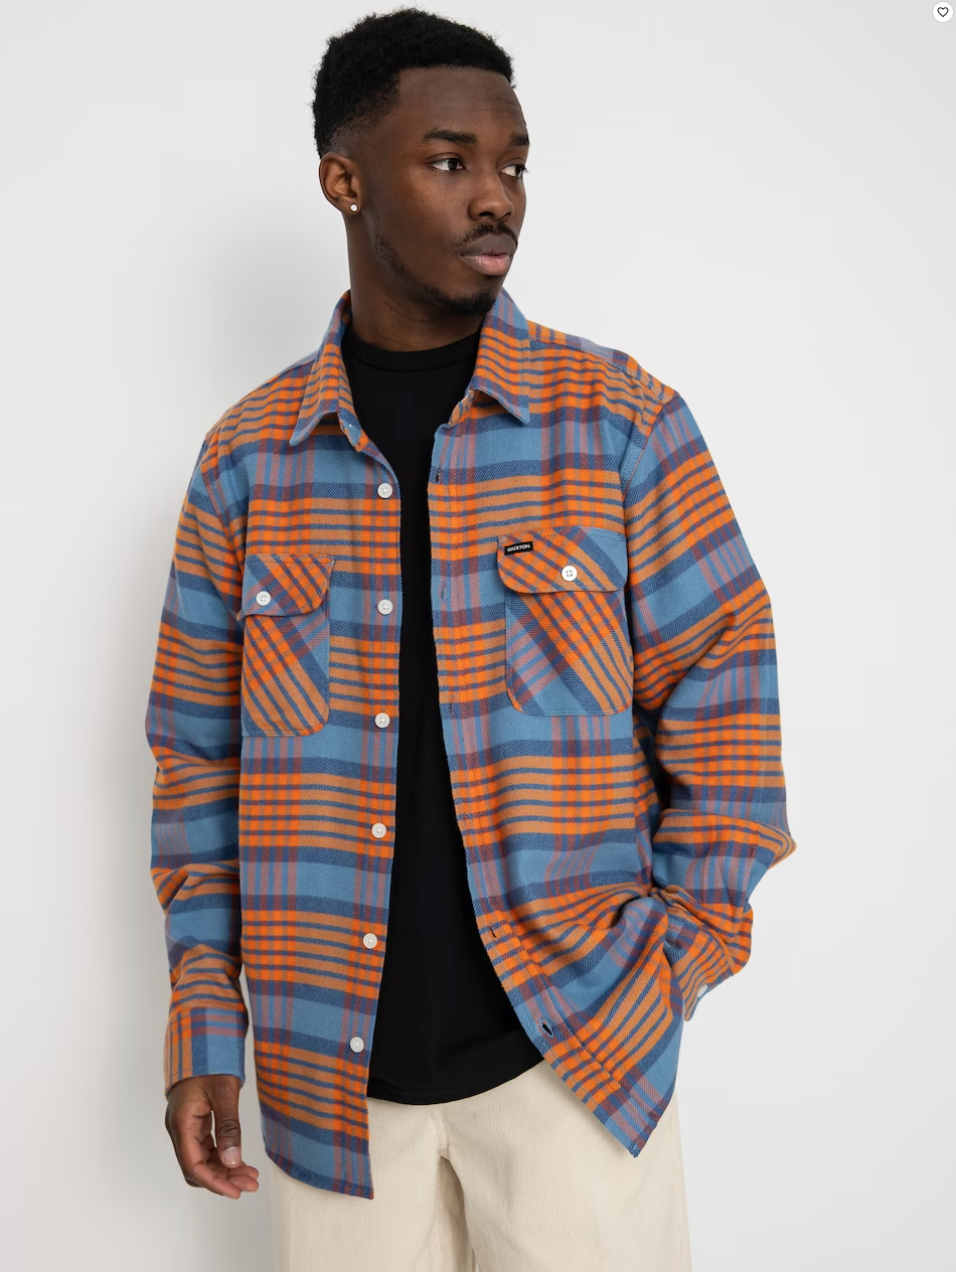 Bowery L/S Flannel